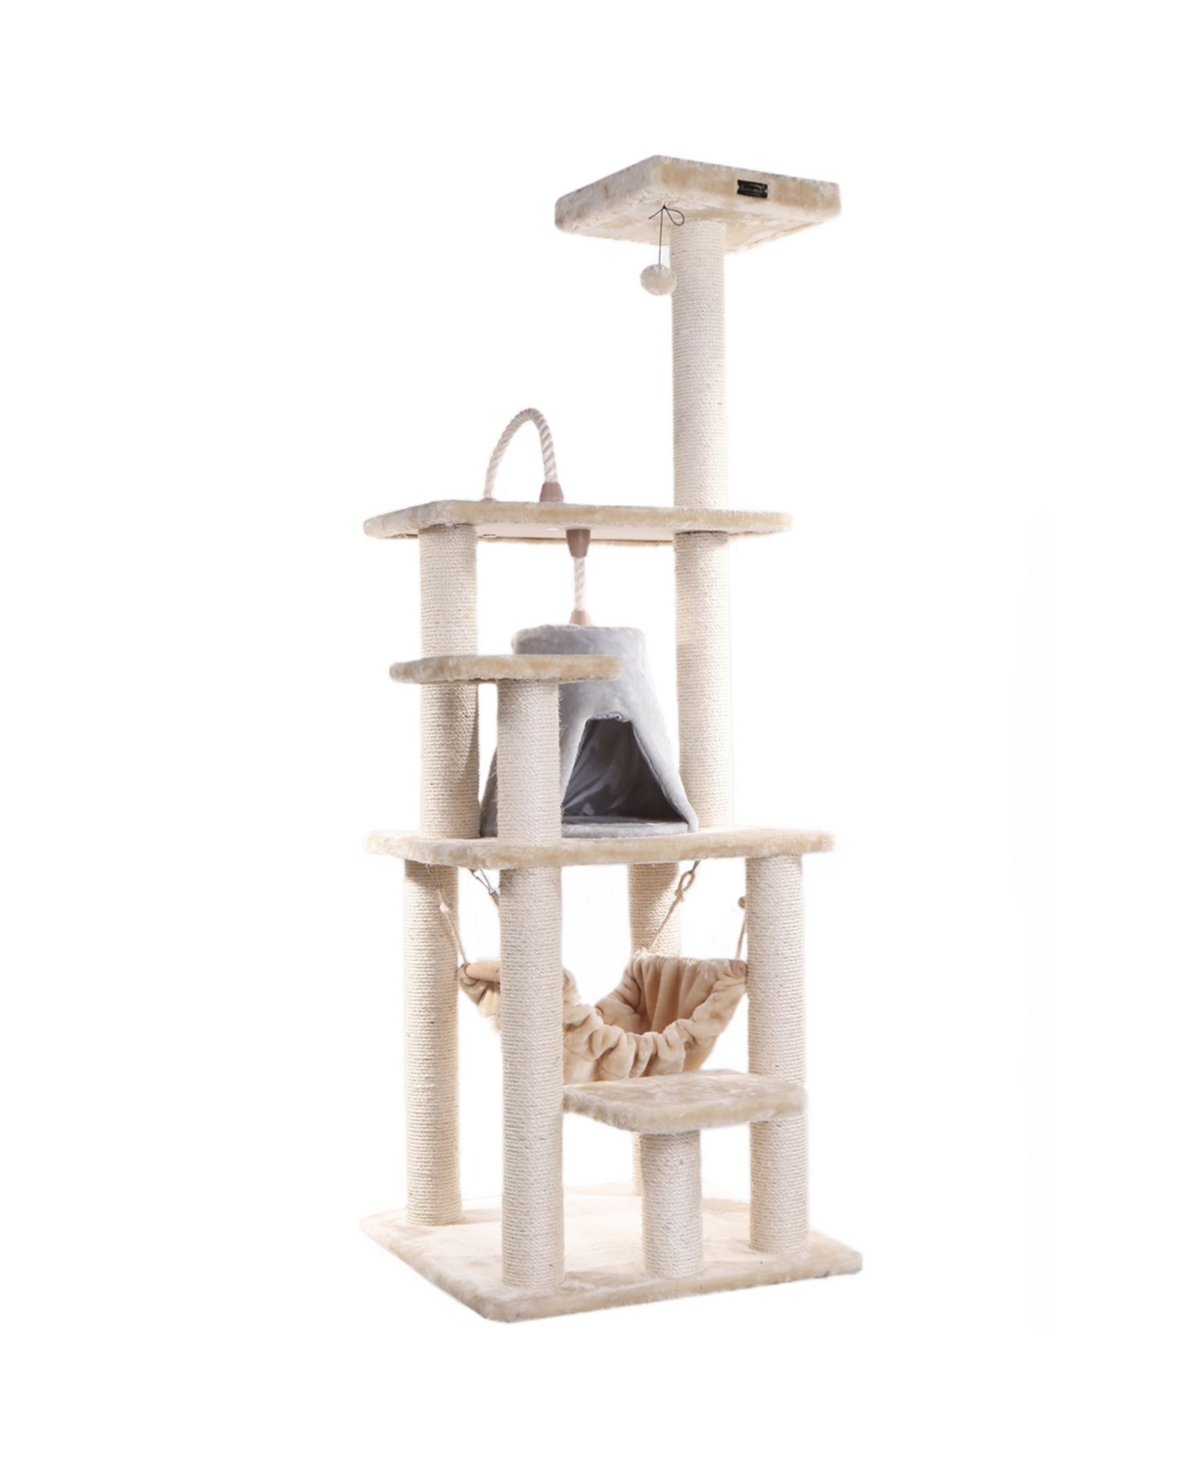 65" Real Wood Cat Tree With Rope, Hammock, Playhouse - Beige